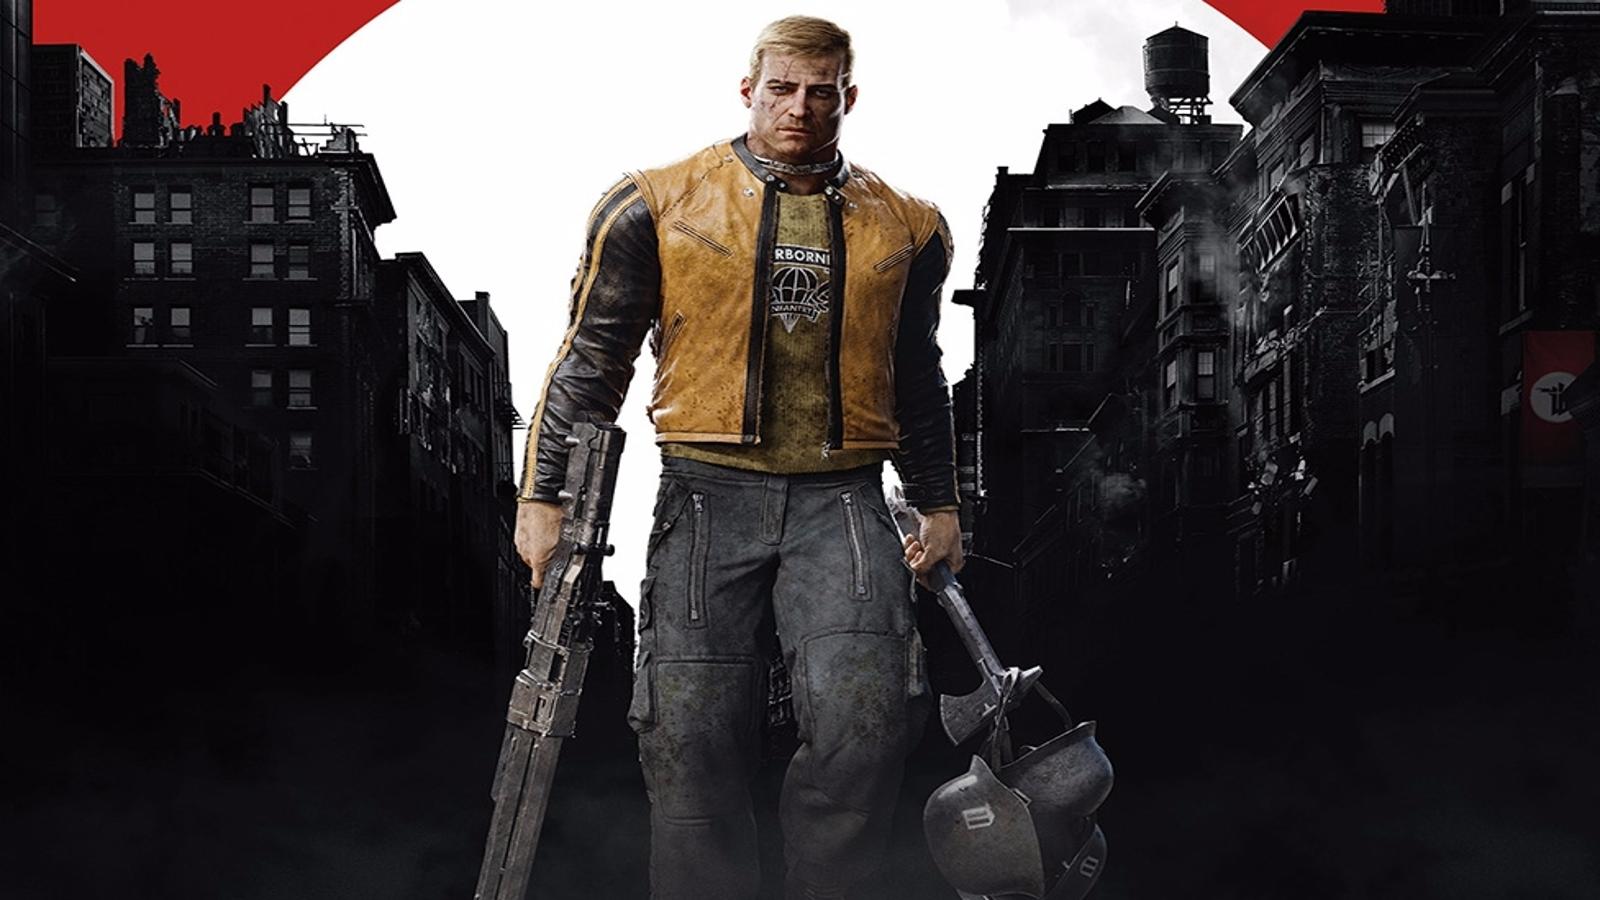 Review: Wolfenstein 2: The New Colossus —